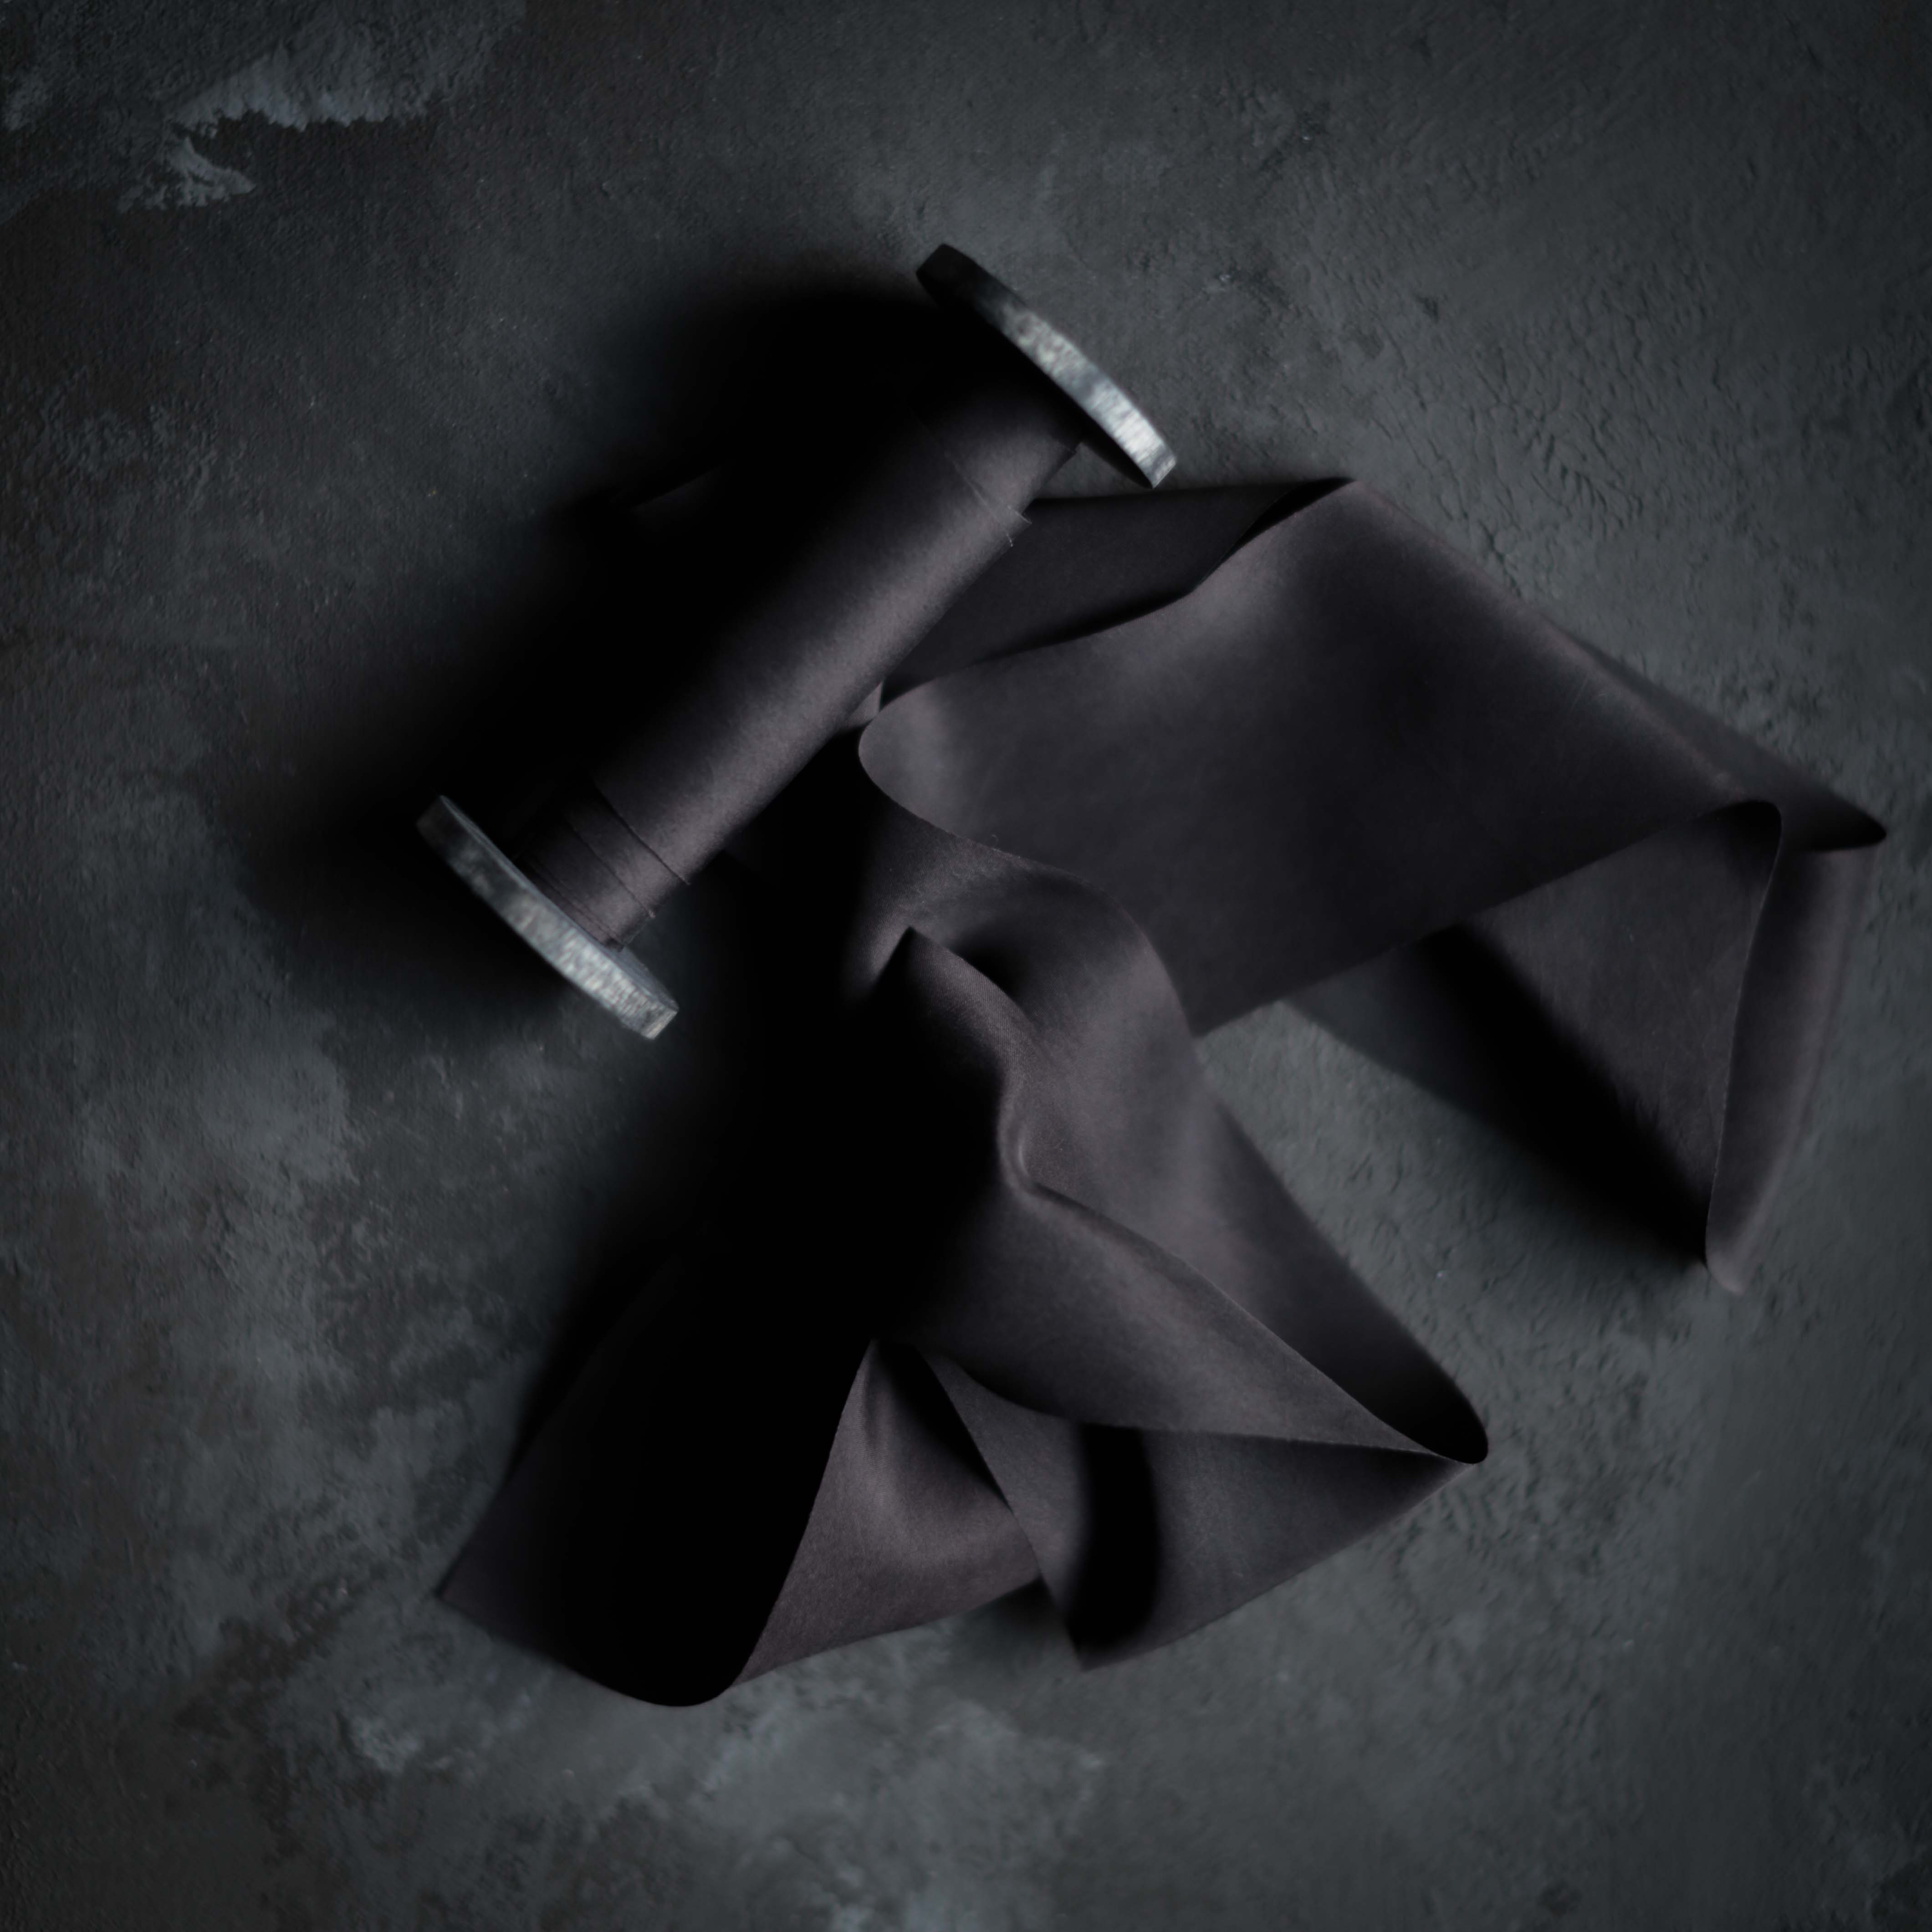 Black silk ribbon as background, abstract and luxury brand desig Photograph  by Anneleven Store - Pixels